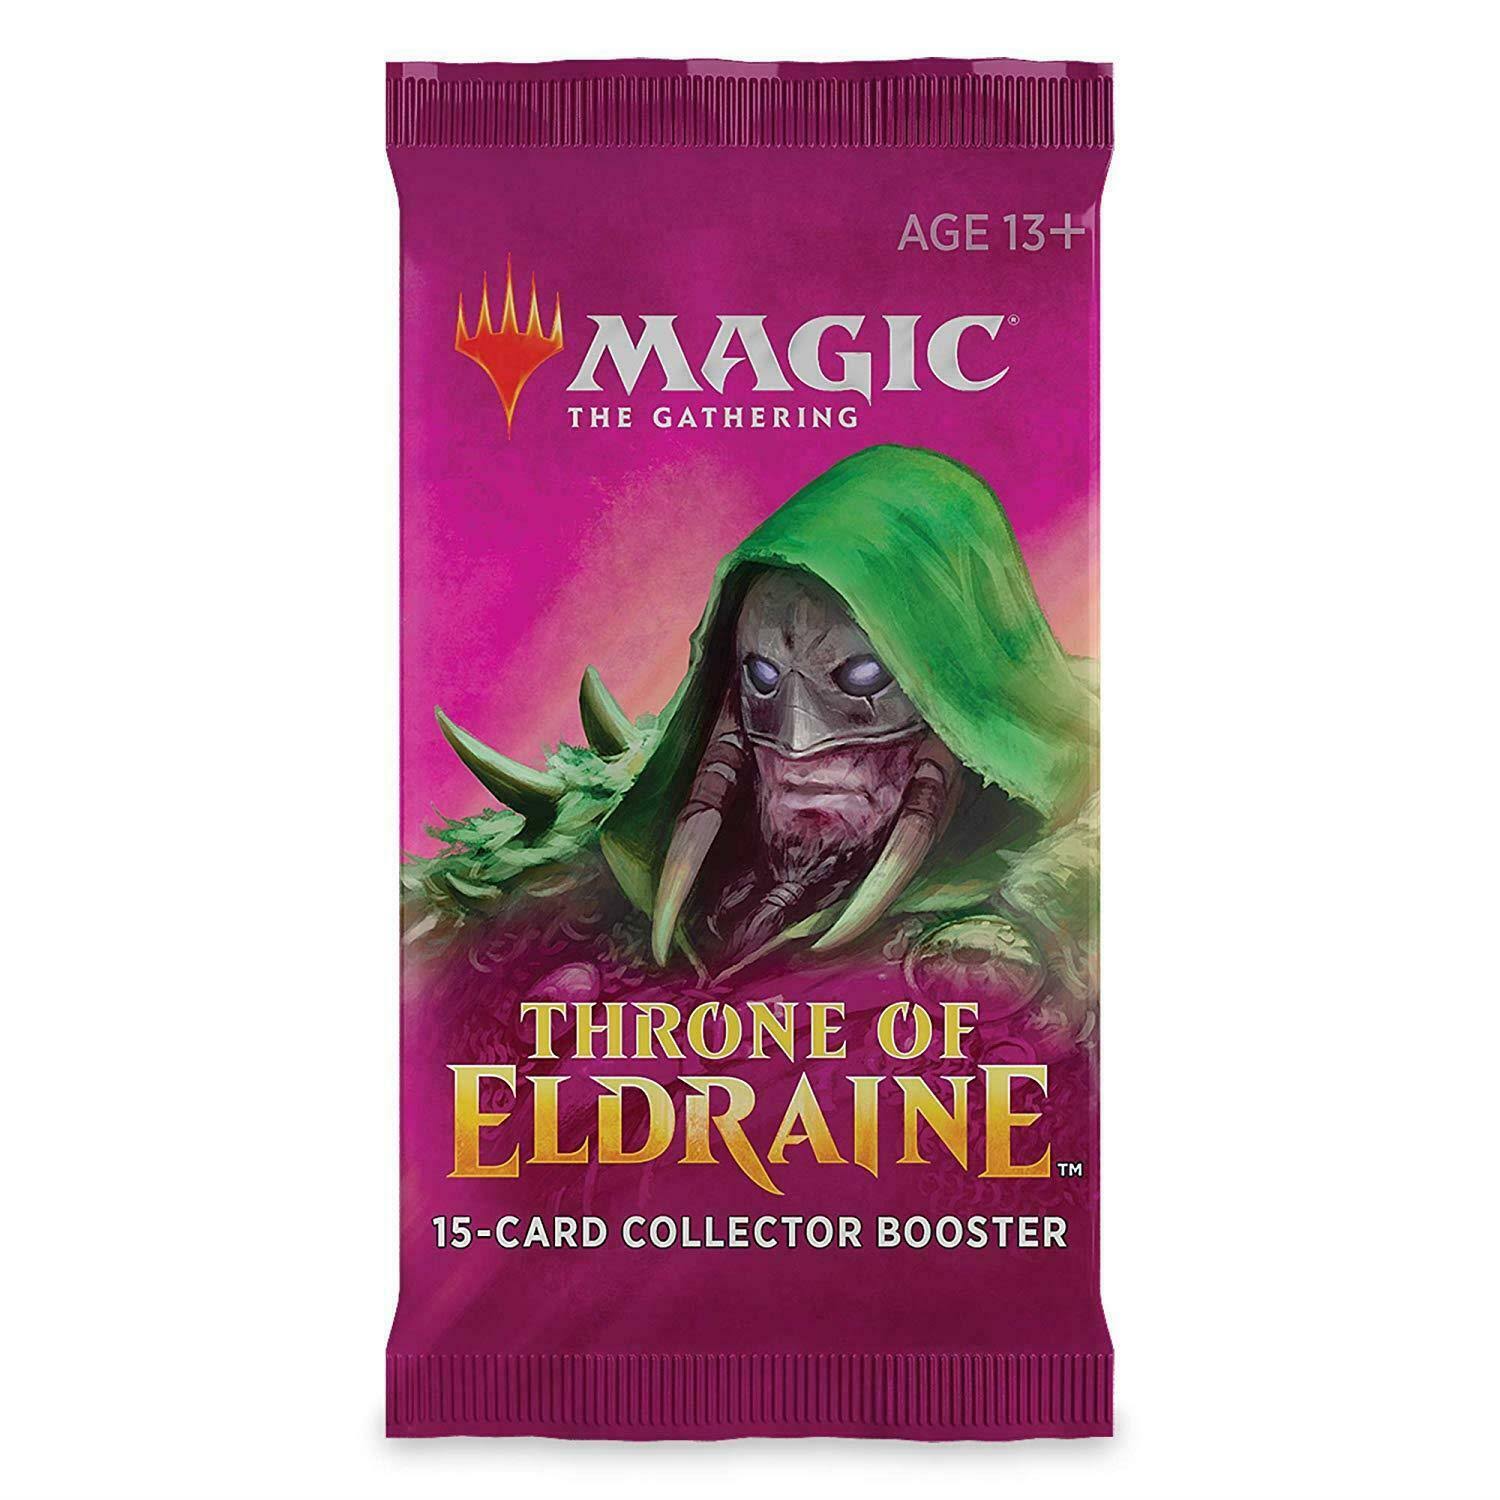 Magic The Gathering Throne of Eldraine Collector Booster Box